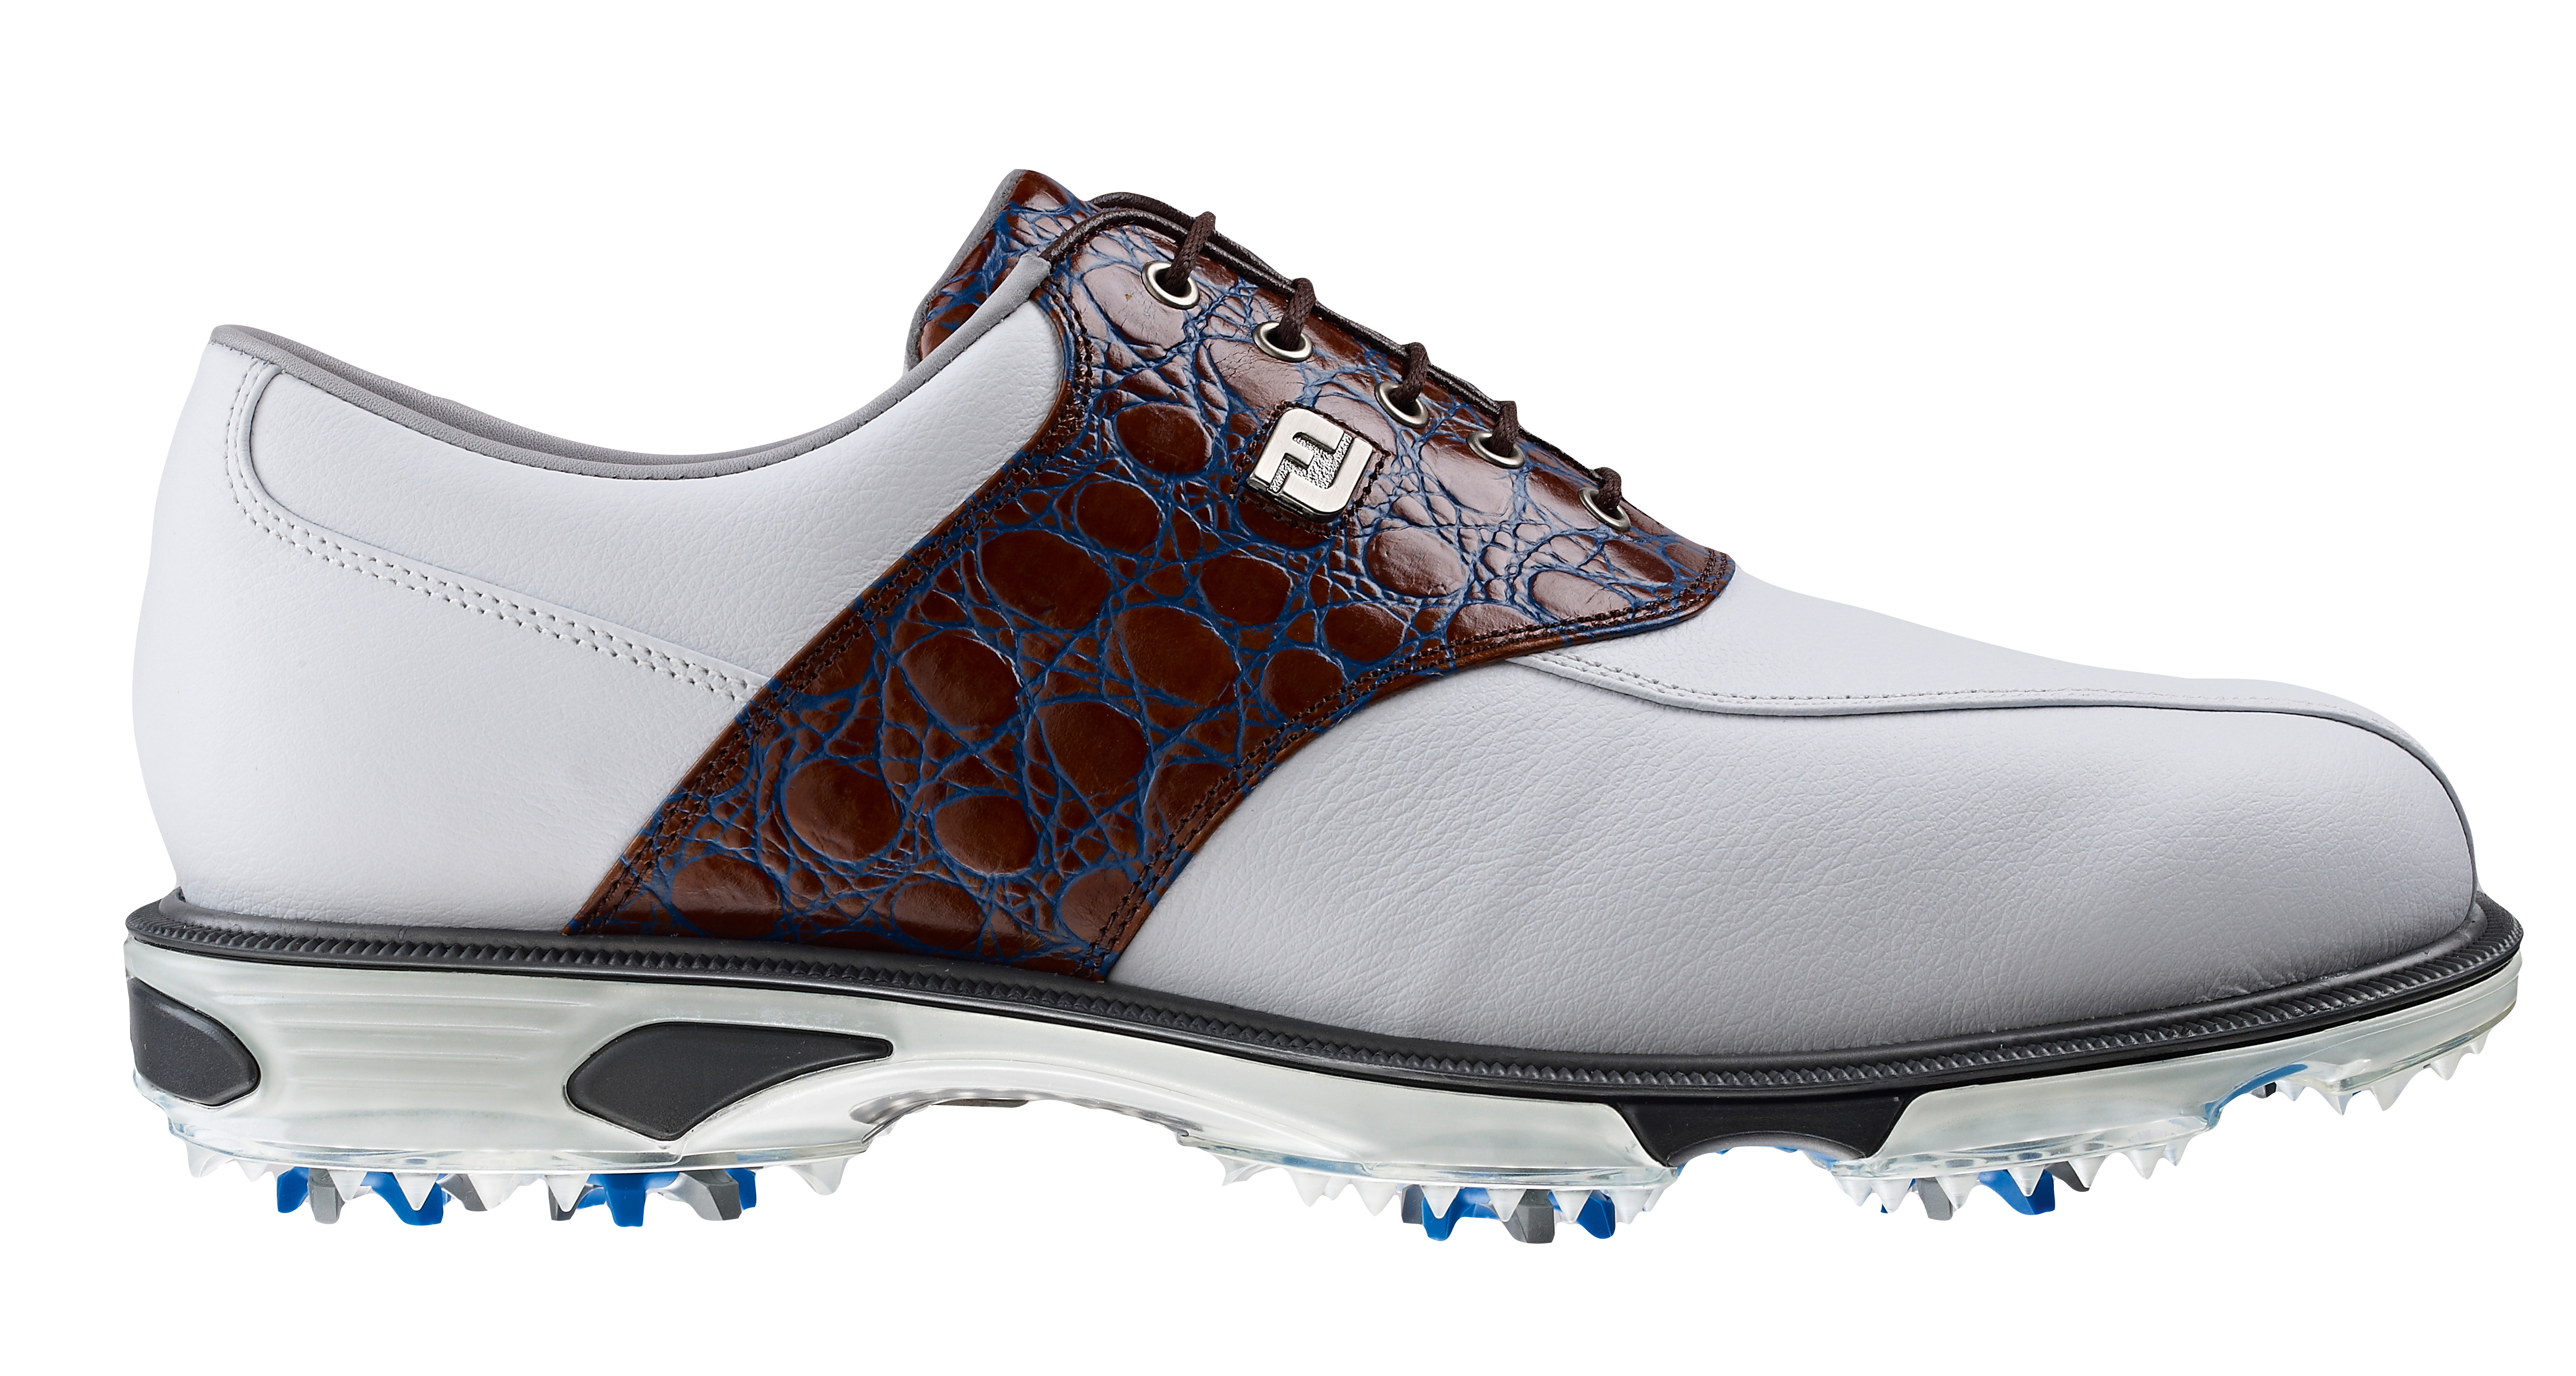 The DryJoys Tour is favoured by Footjoy staffers